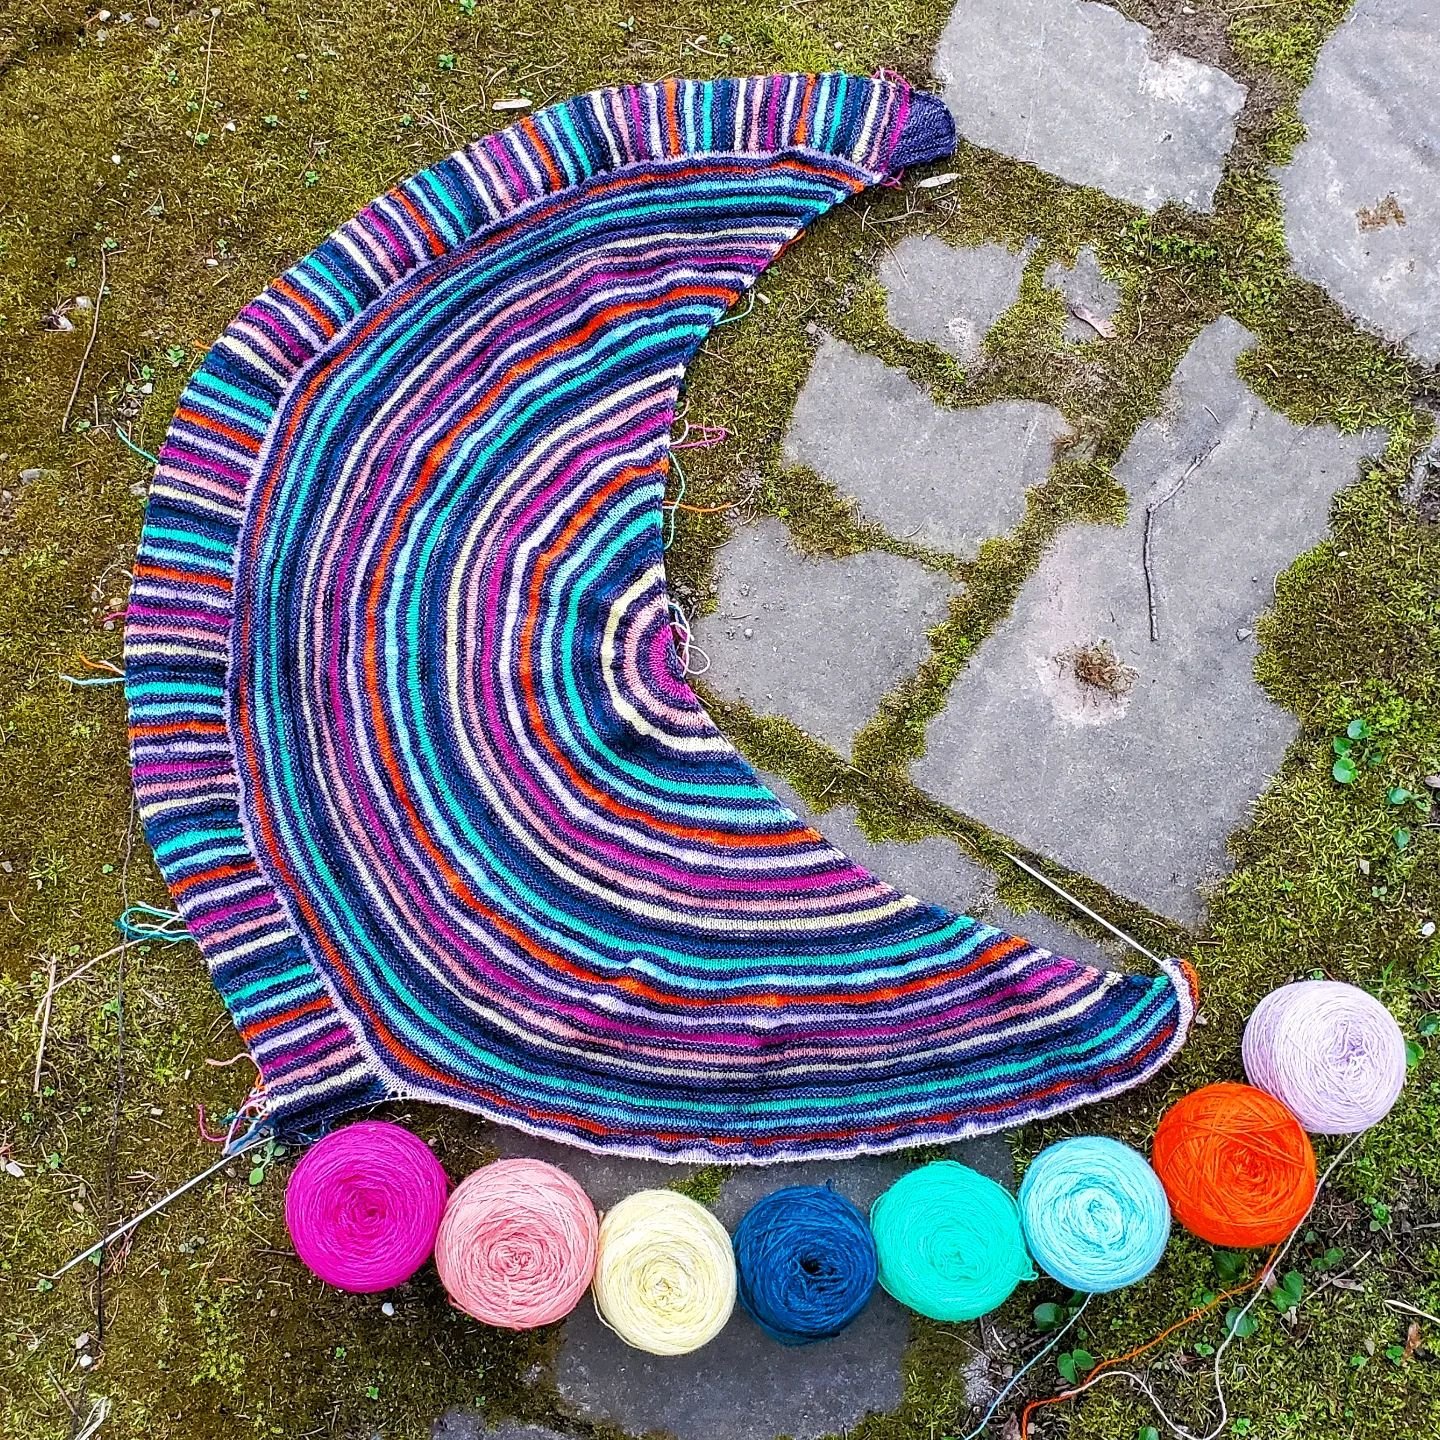 Next up on the Ellis pattern roundup is a project that has brought me incredible joy and one that I simply cannot wait to get off the needles and into my wardrobe rotation. 

Behold, Painting Rainbows by Stephen West, an epic shawl that is here to ta